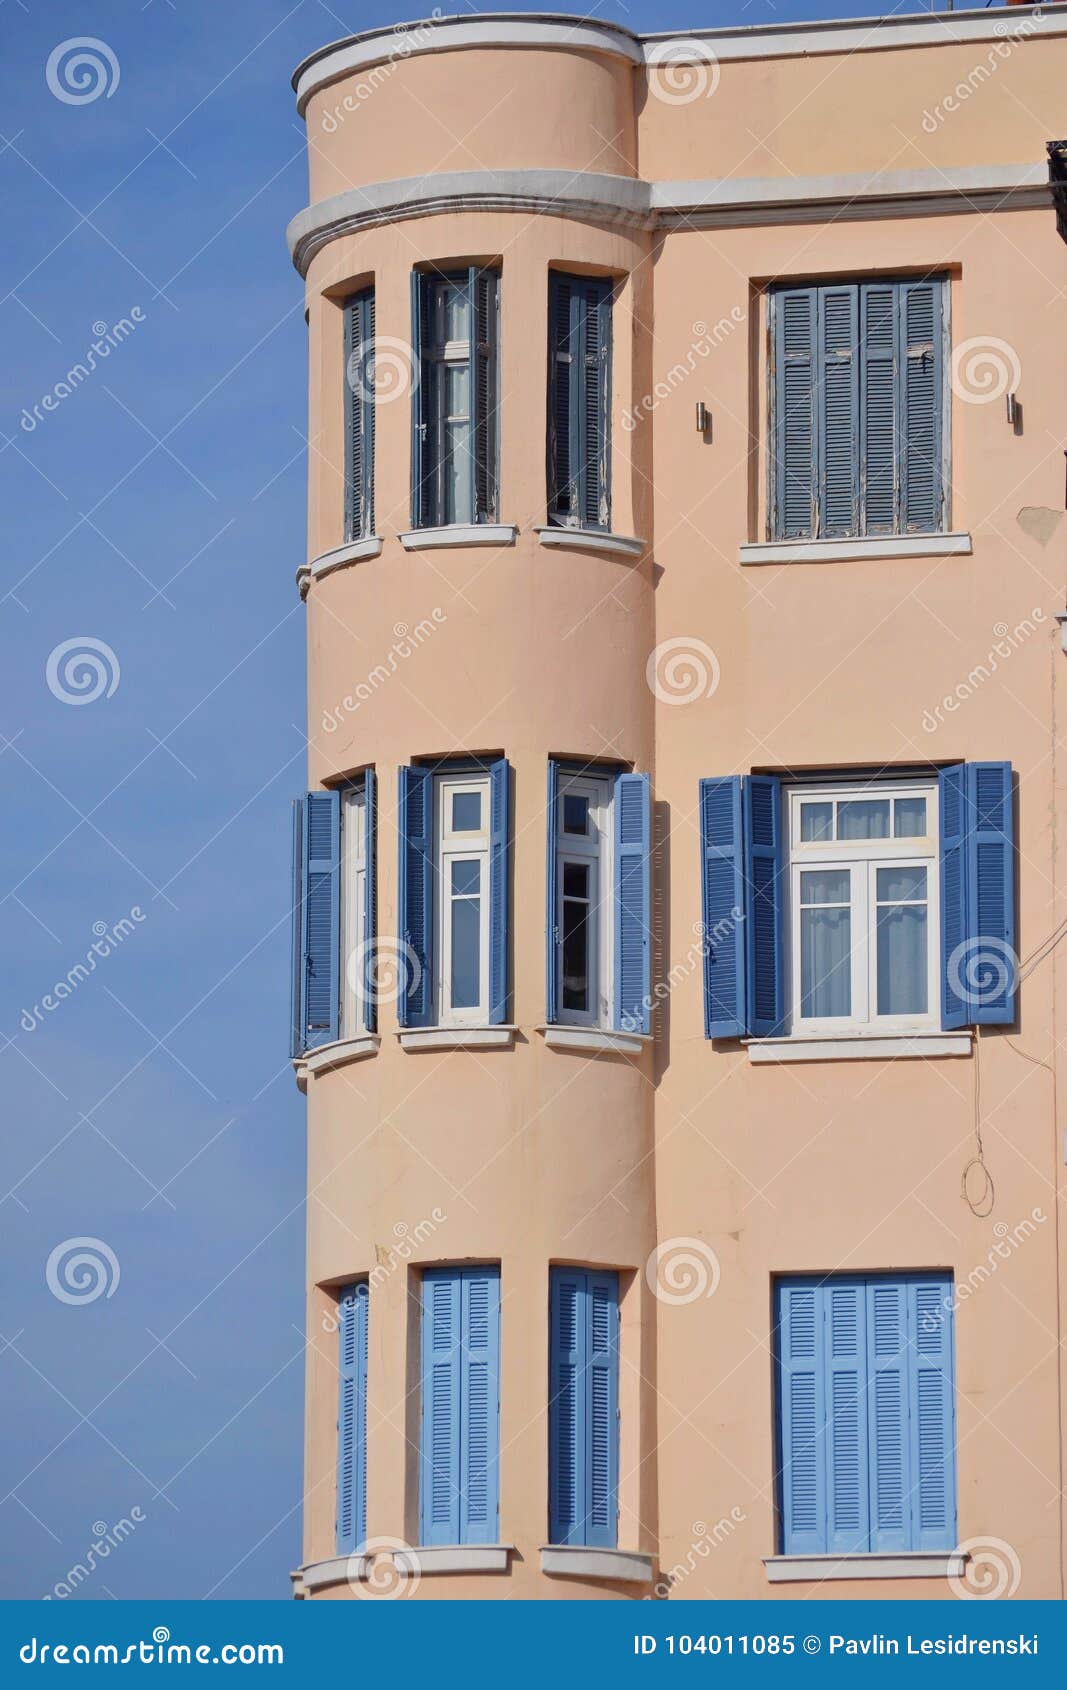 Building with white windows and blue dormers. Building with white windows and blue skylights. Shot in the open.